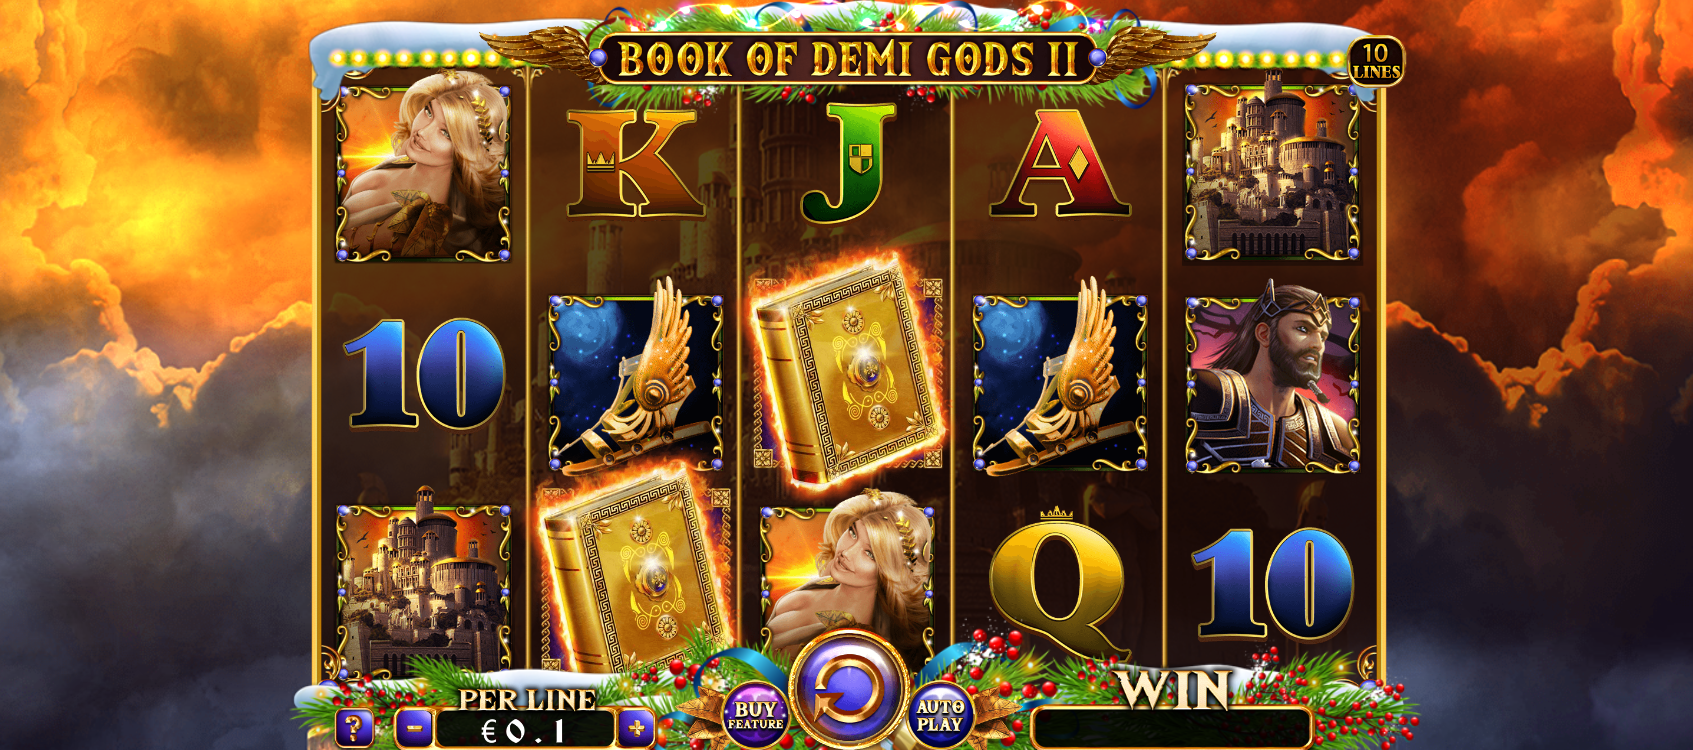 Book of Demi Gods 2 Slot Review